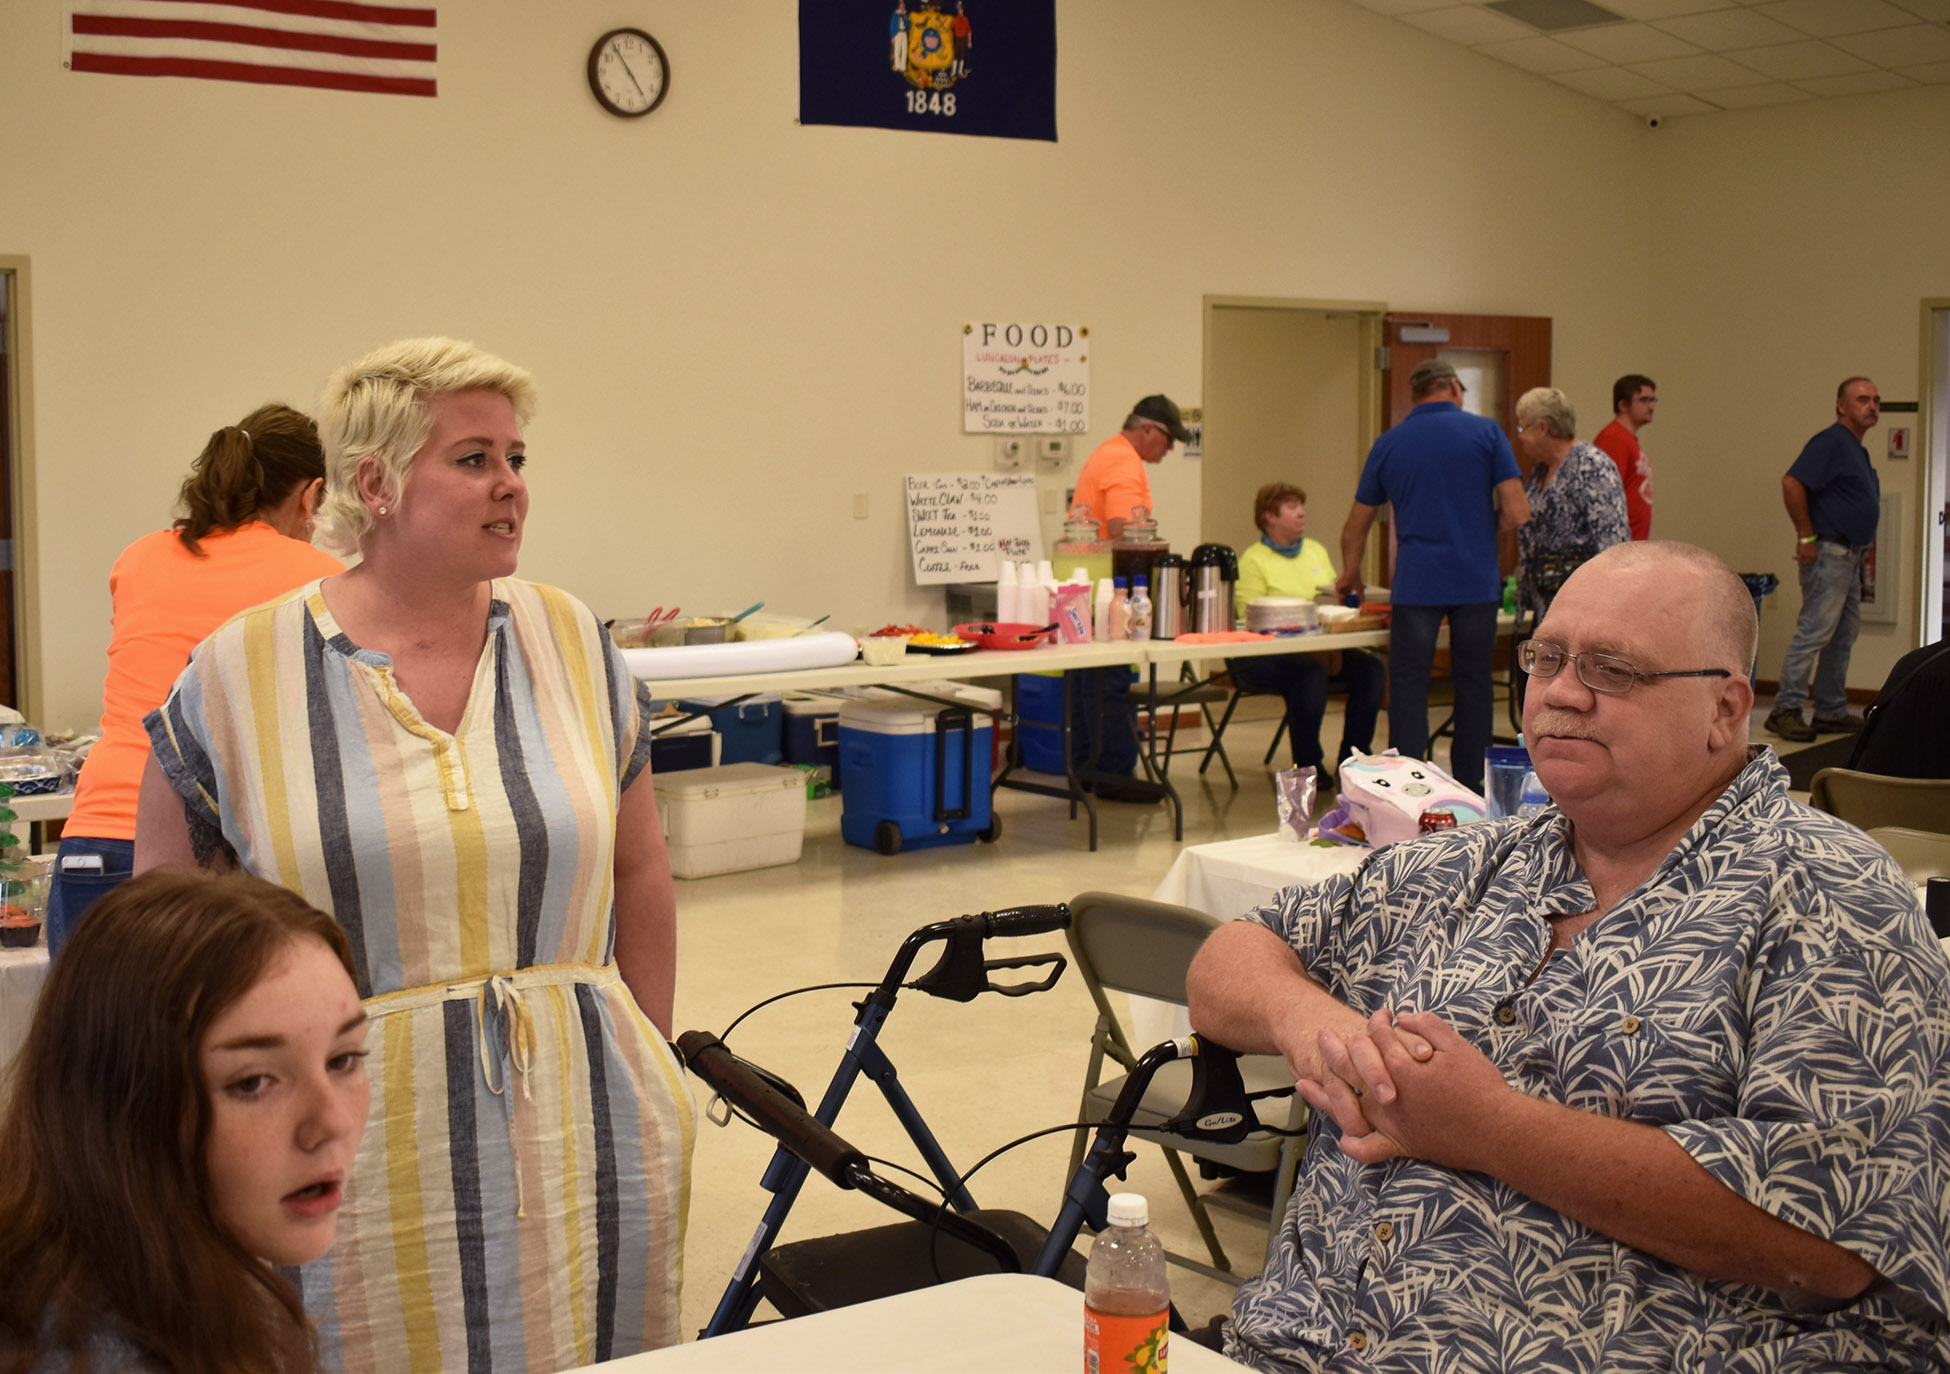 Betsy Bloch, second from left, speaks with family members at a community benefit for her family in Merrill